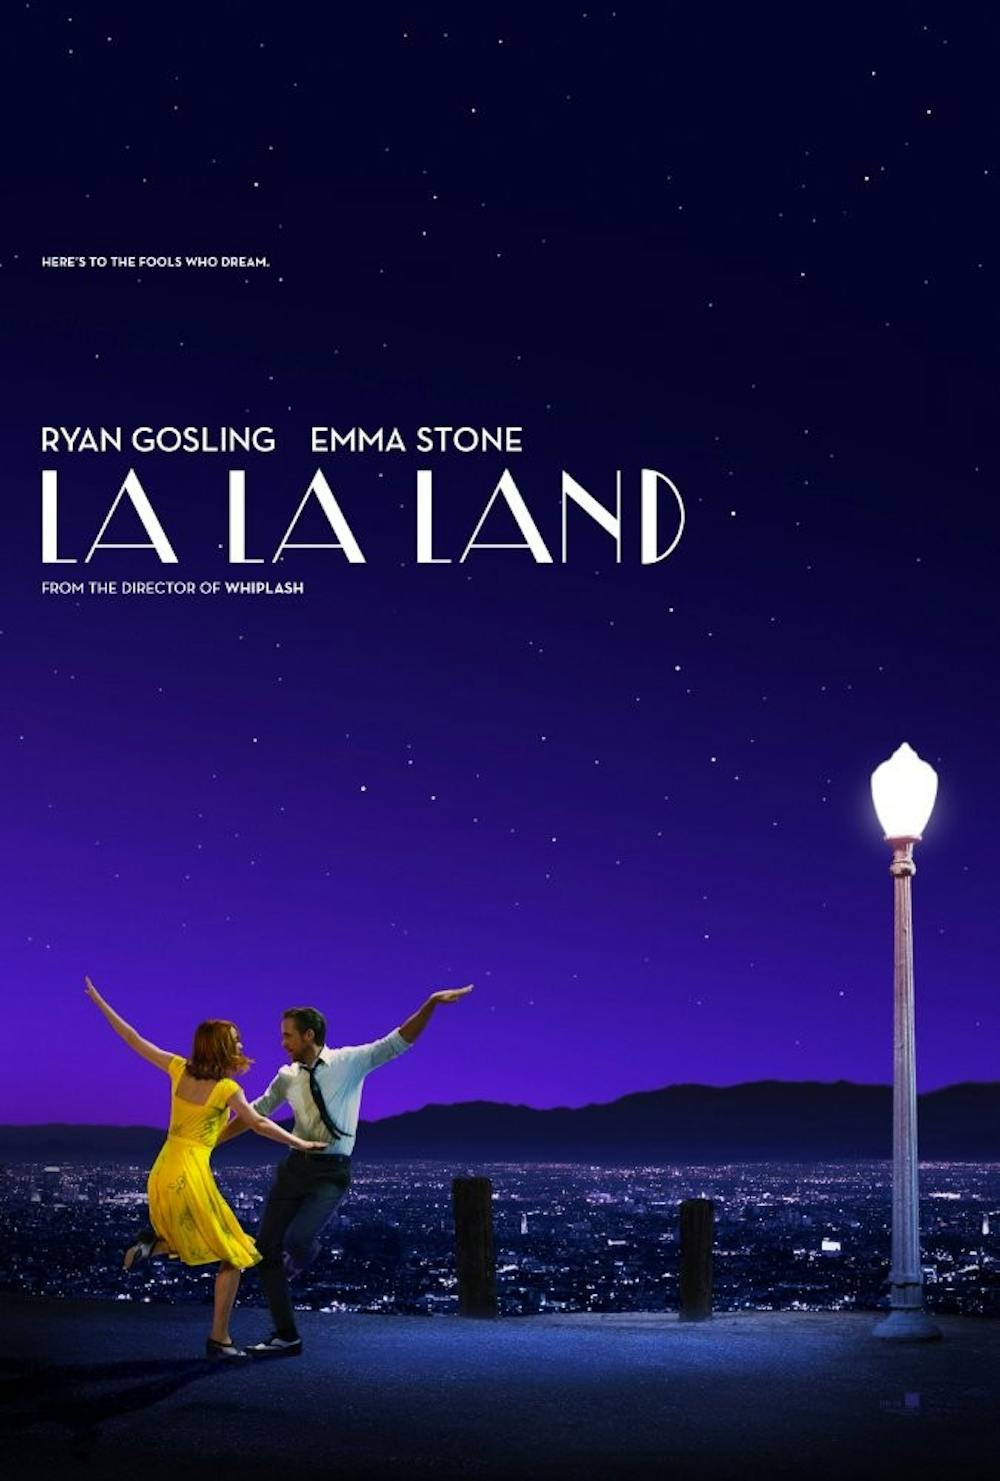 <p>"La La Land" is both a feel-good movie and an undeniably great film, the rightful winner.</p>